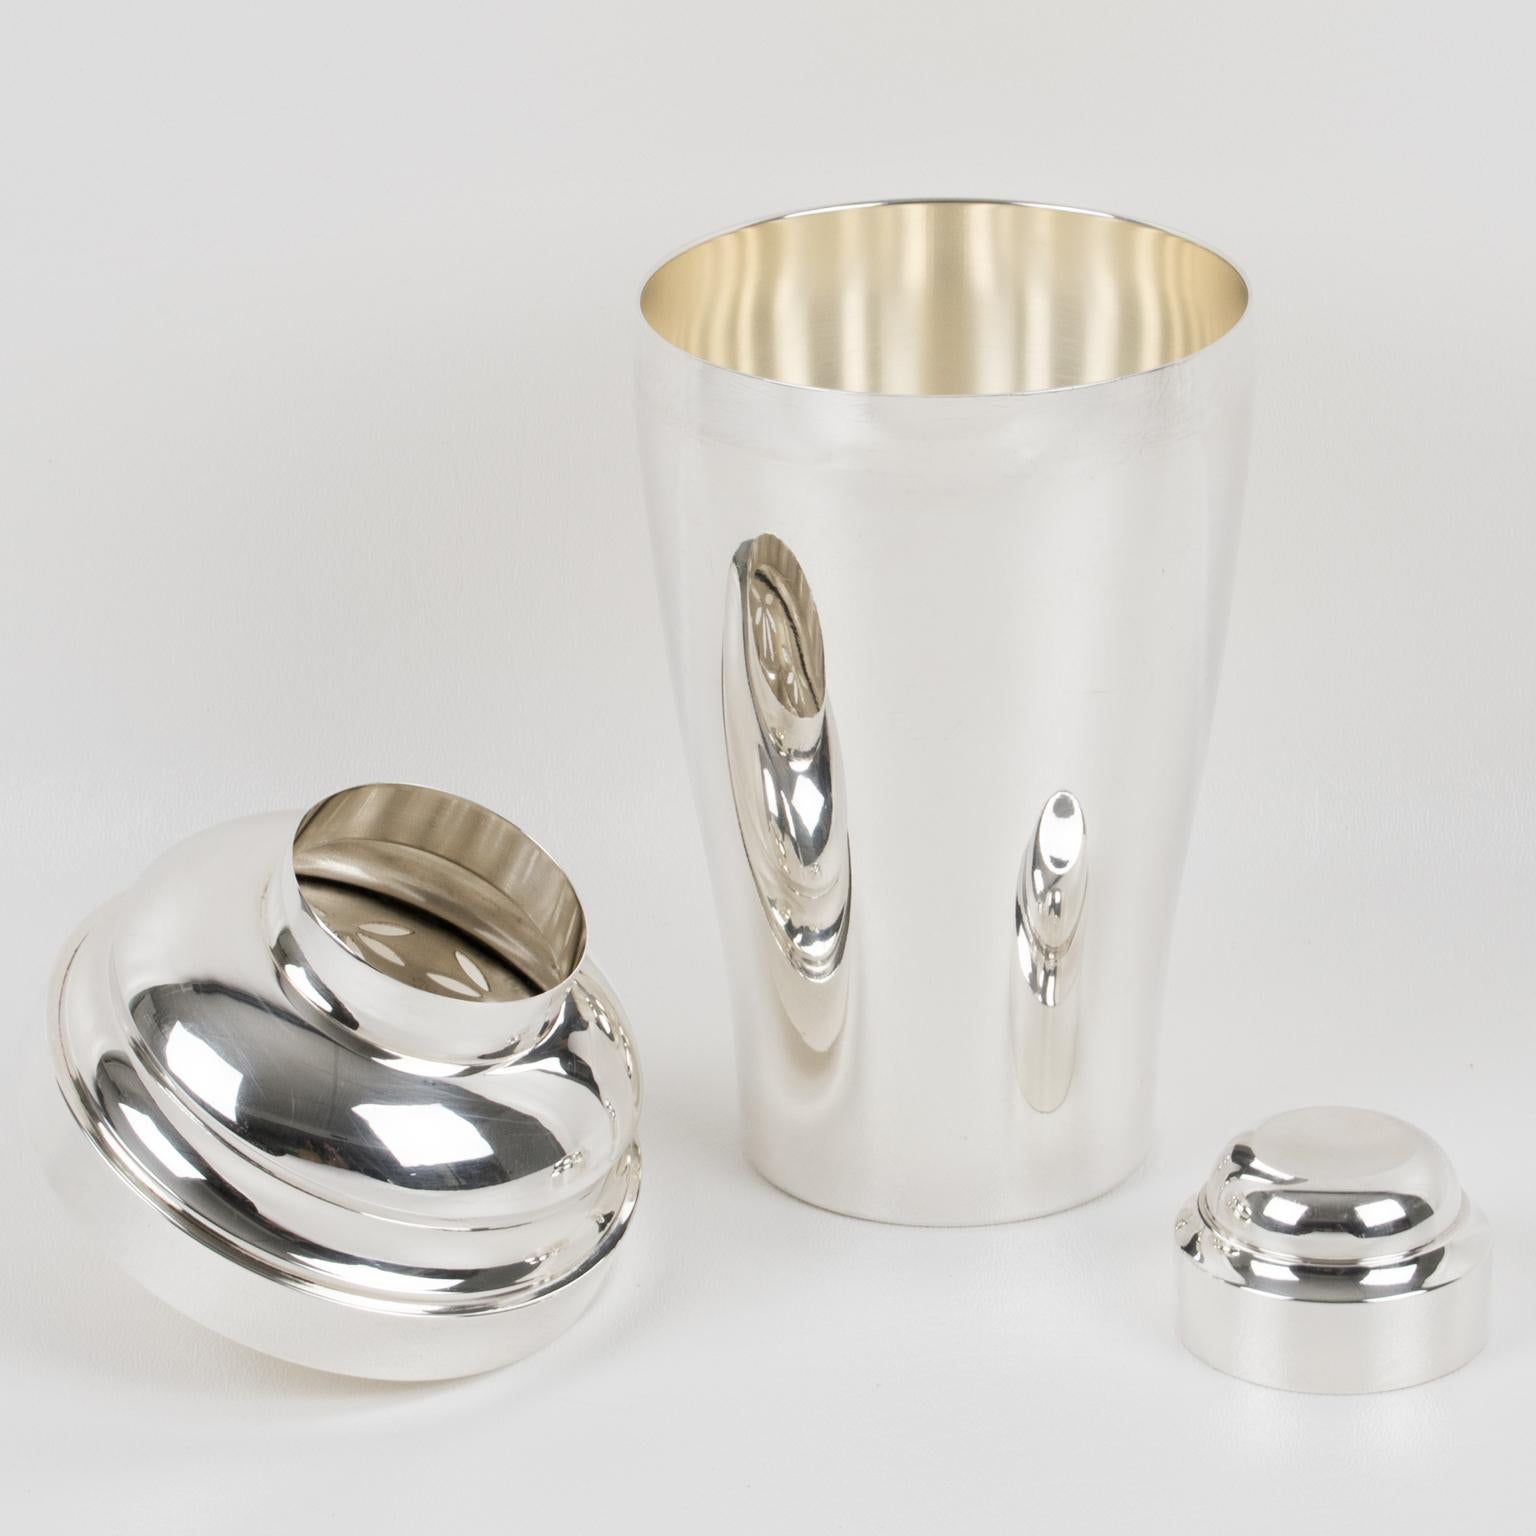 This exquisite three-sectioned cocktail shaker was crafted by the renowned silversmith Saint Medard in Paris. The beautiful Art Deco design features a geometric pattern and is adorned with a removable cap and a built-in lemon squeezer inside the